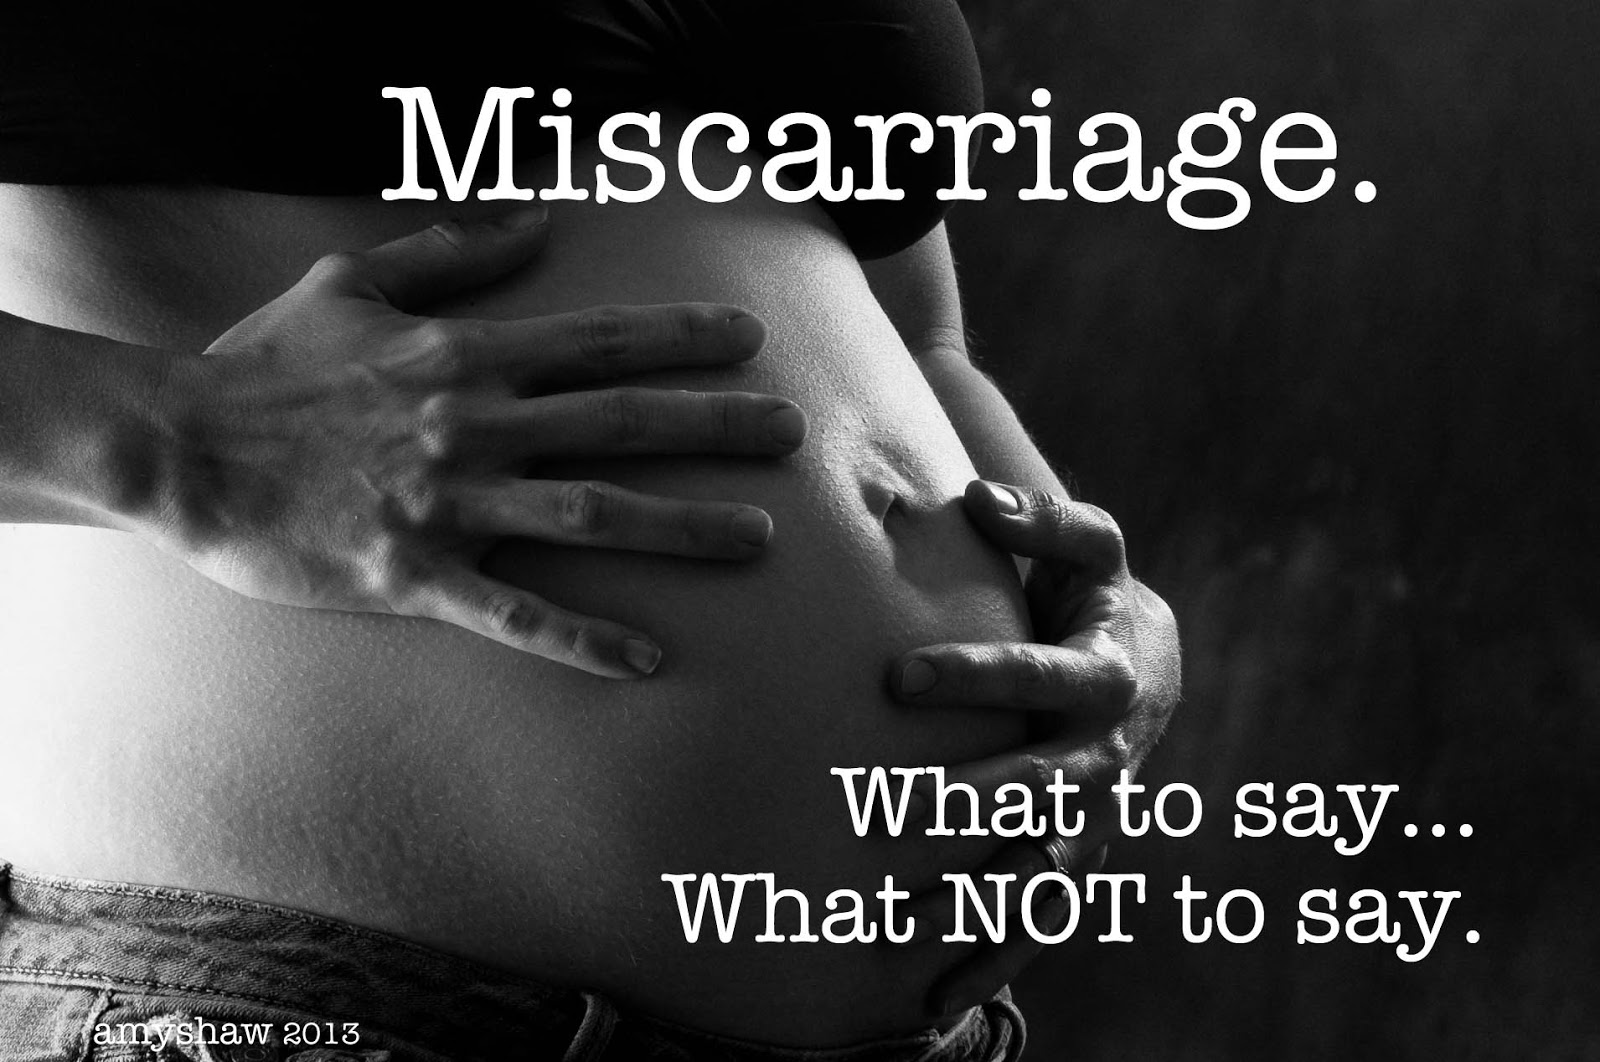 COMFORTING A LOVED ONE WHO EXPERIENCED MISCARRIAGE